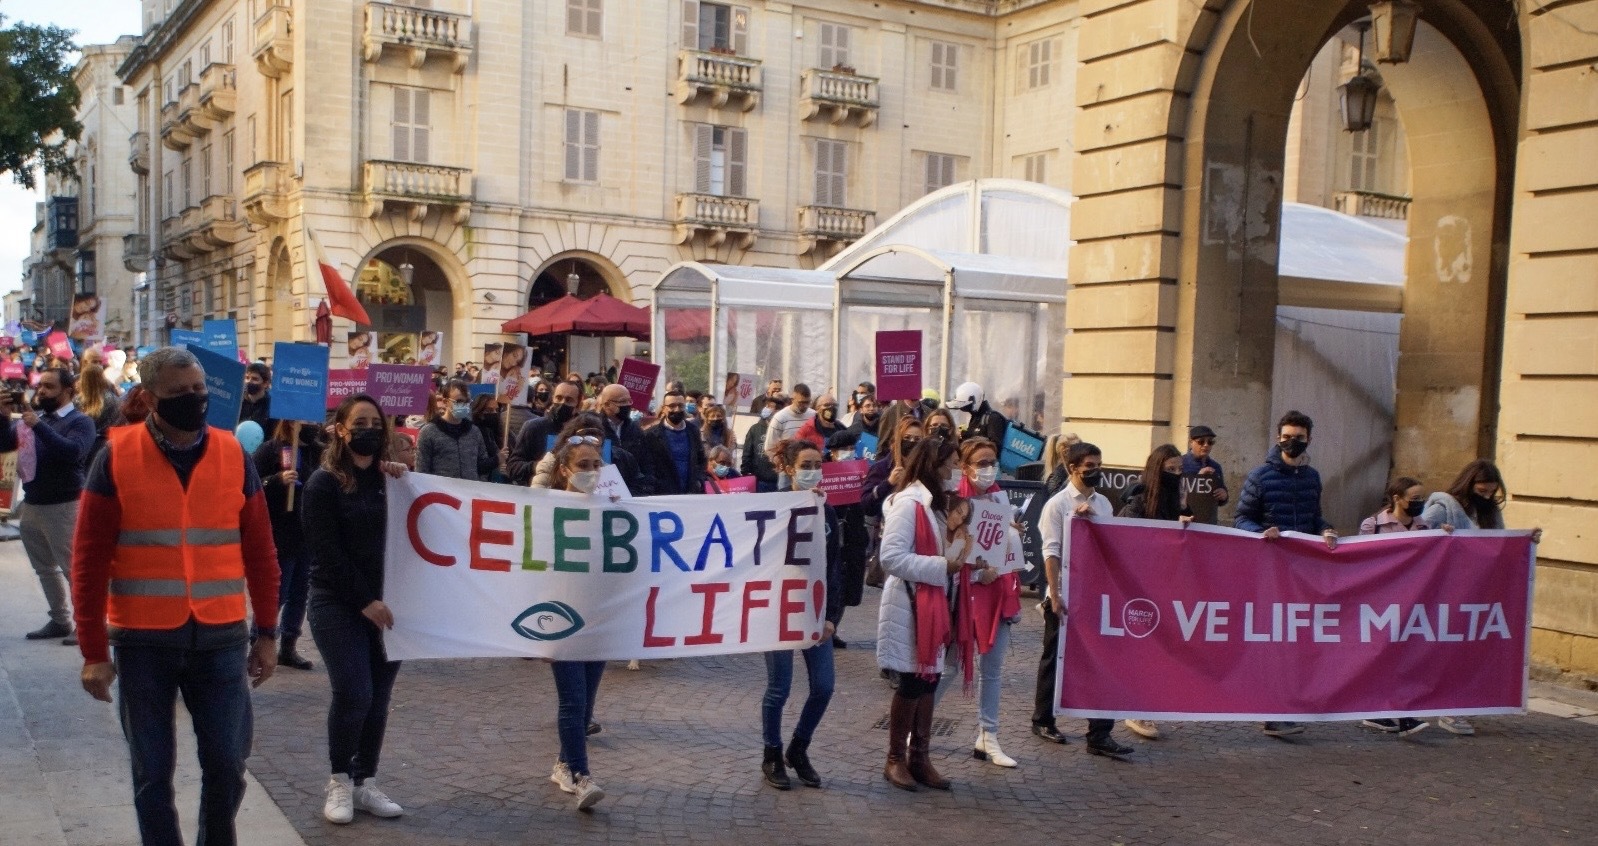 10.12.2021- Large pro-life rally in Malta in opposition to attempts to impose abortion